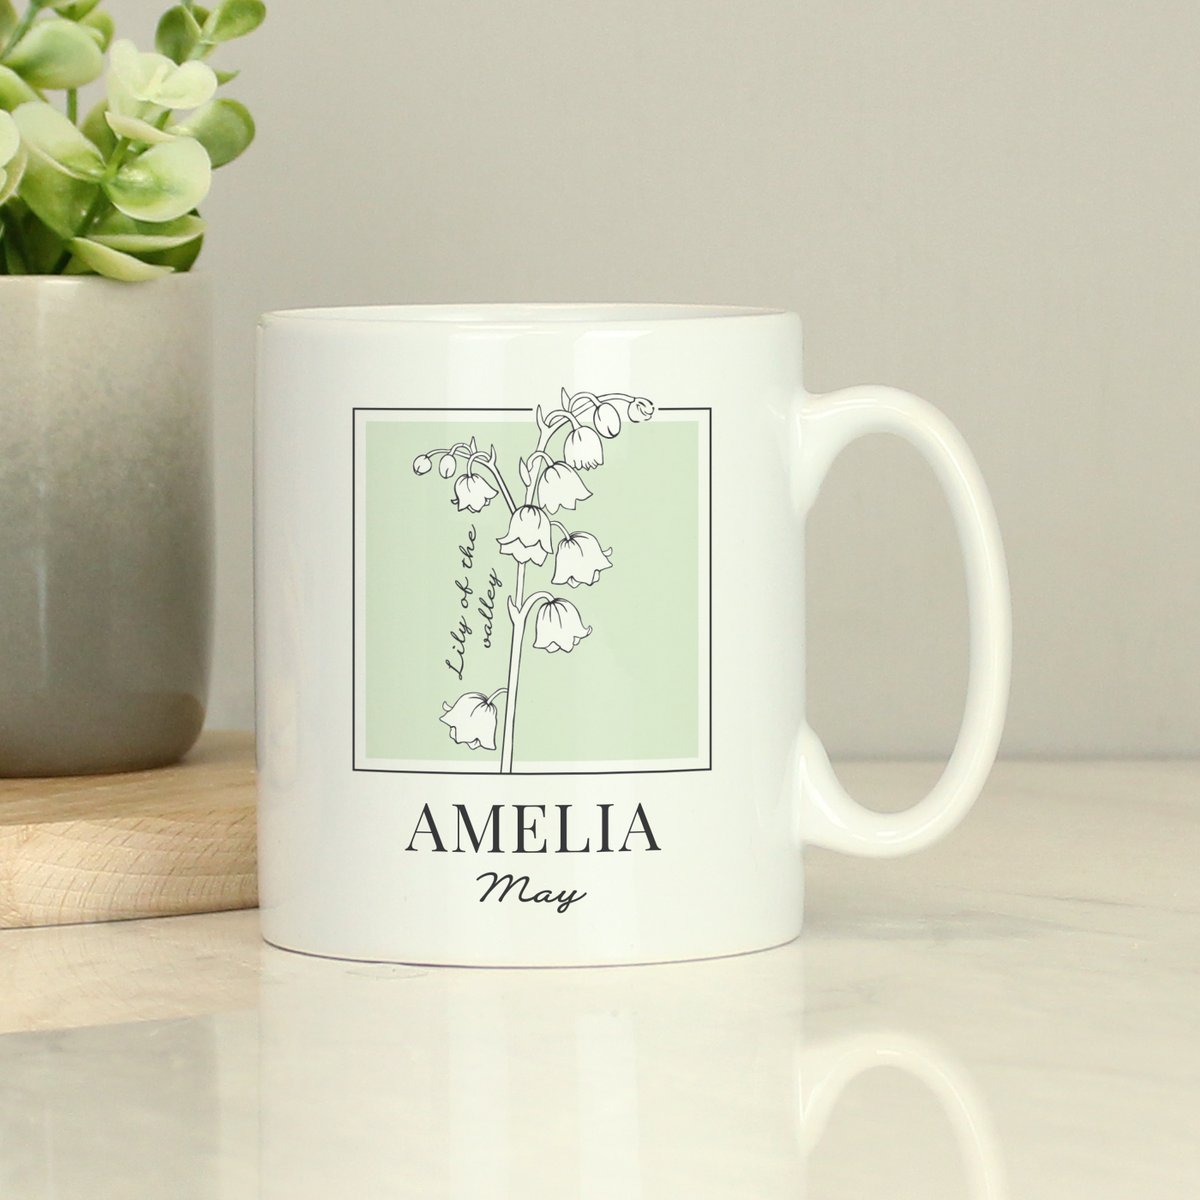 Decorated with a Lily of the valley illustration, the birth flower for May, this personalised mug is a great gift idea for an up and coming birthday  lilybluestore.com/products/perso…

#giftideas #birthday #mhhsbd  #EarlyBiz